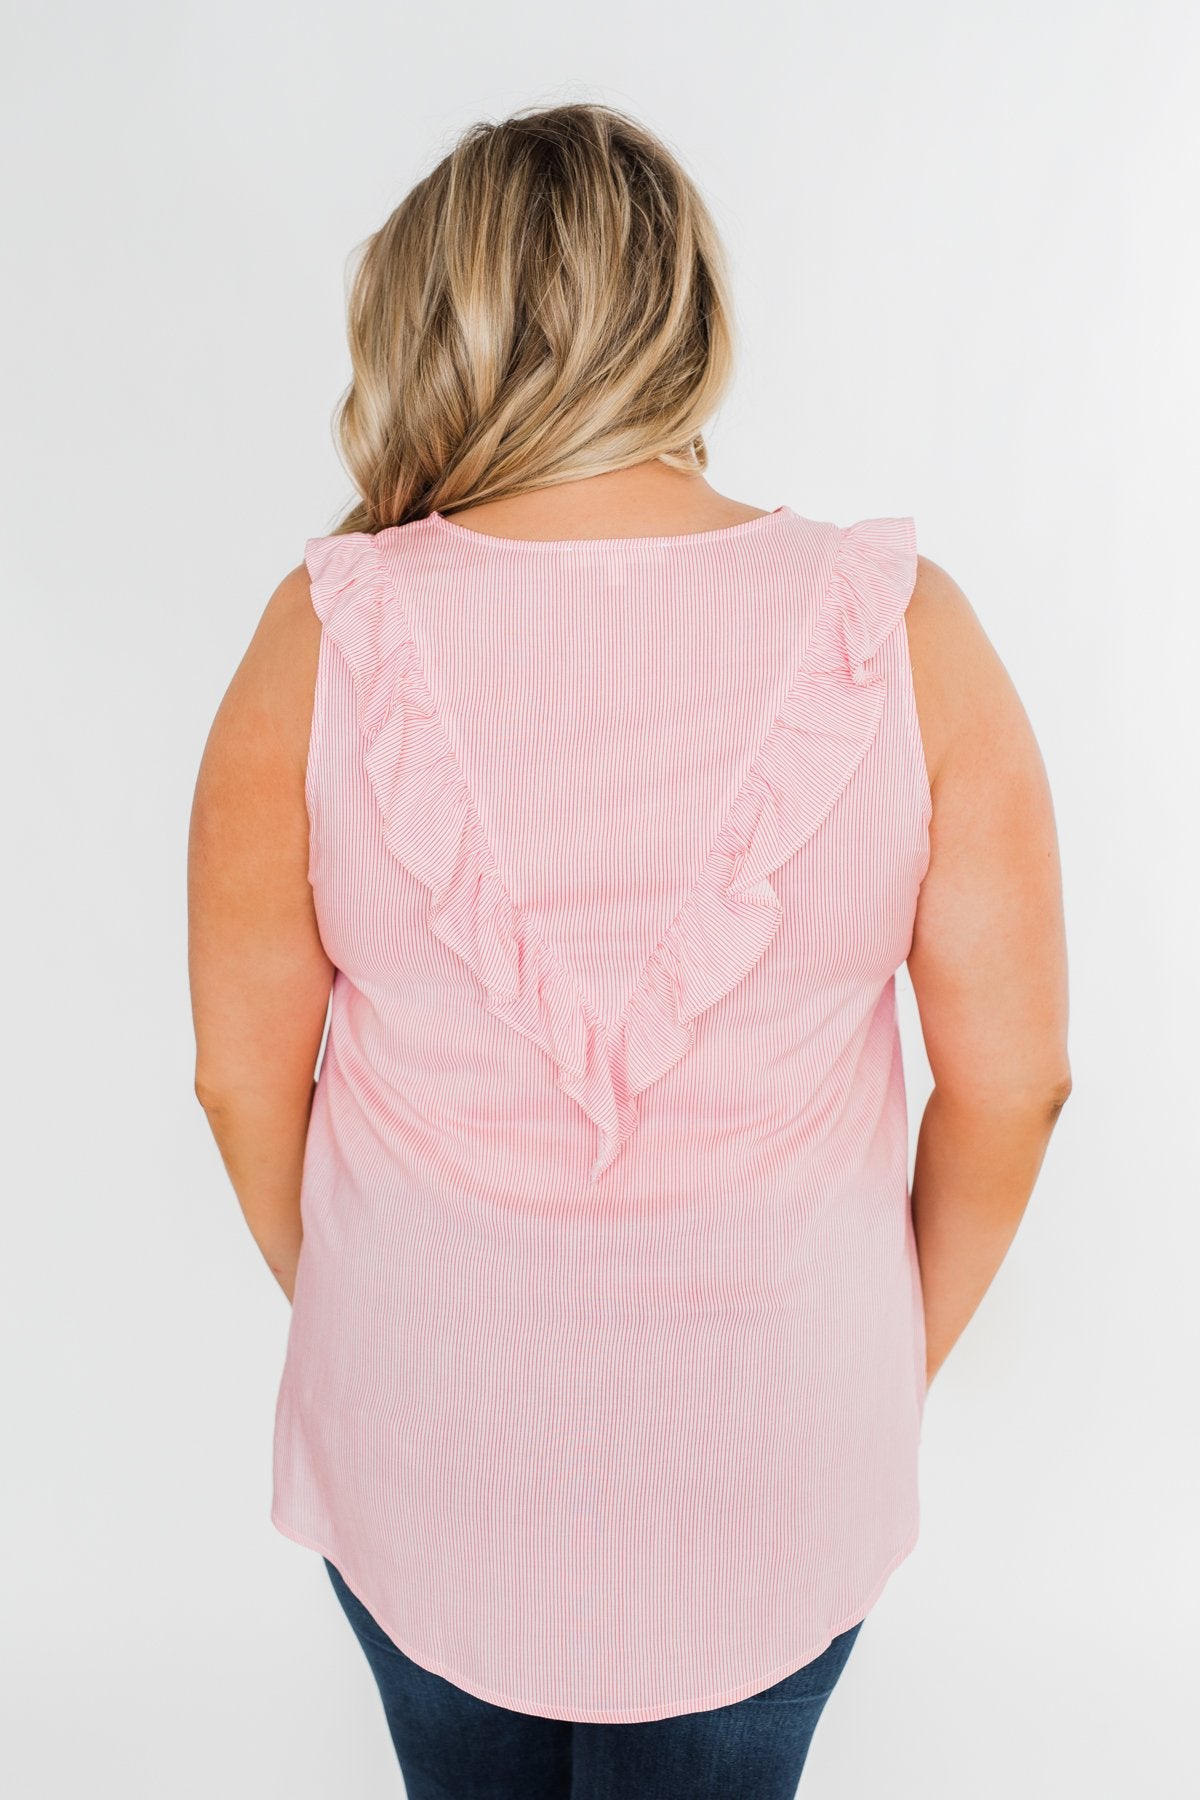 All Eyes On Me Striped Ruffle Tank Top- Pink